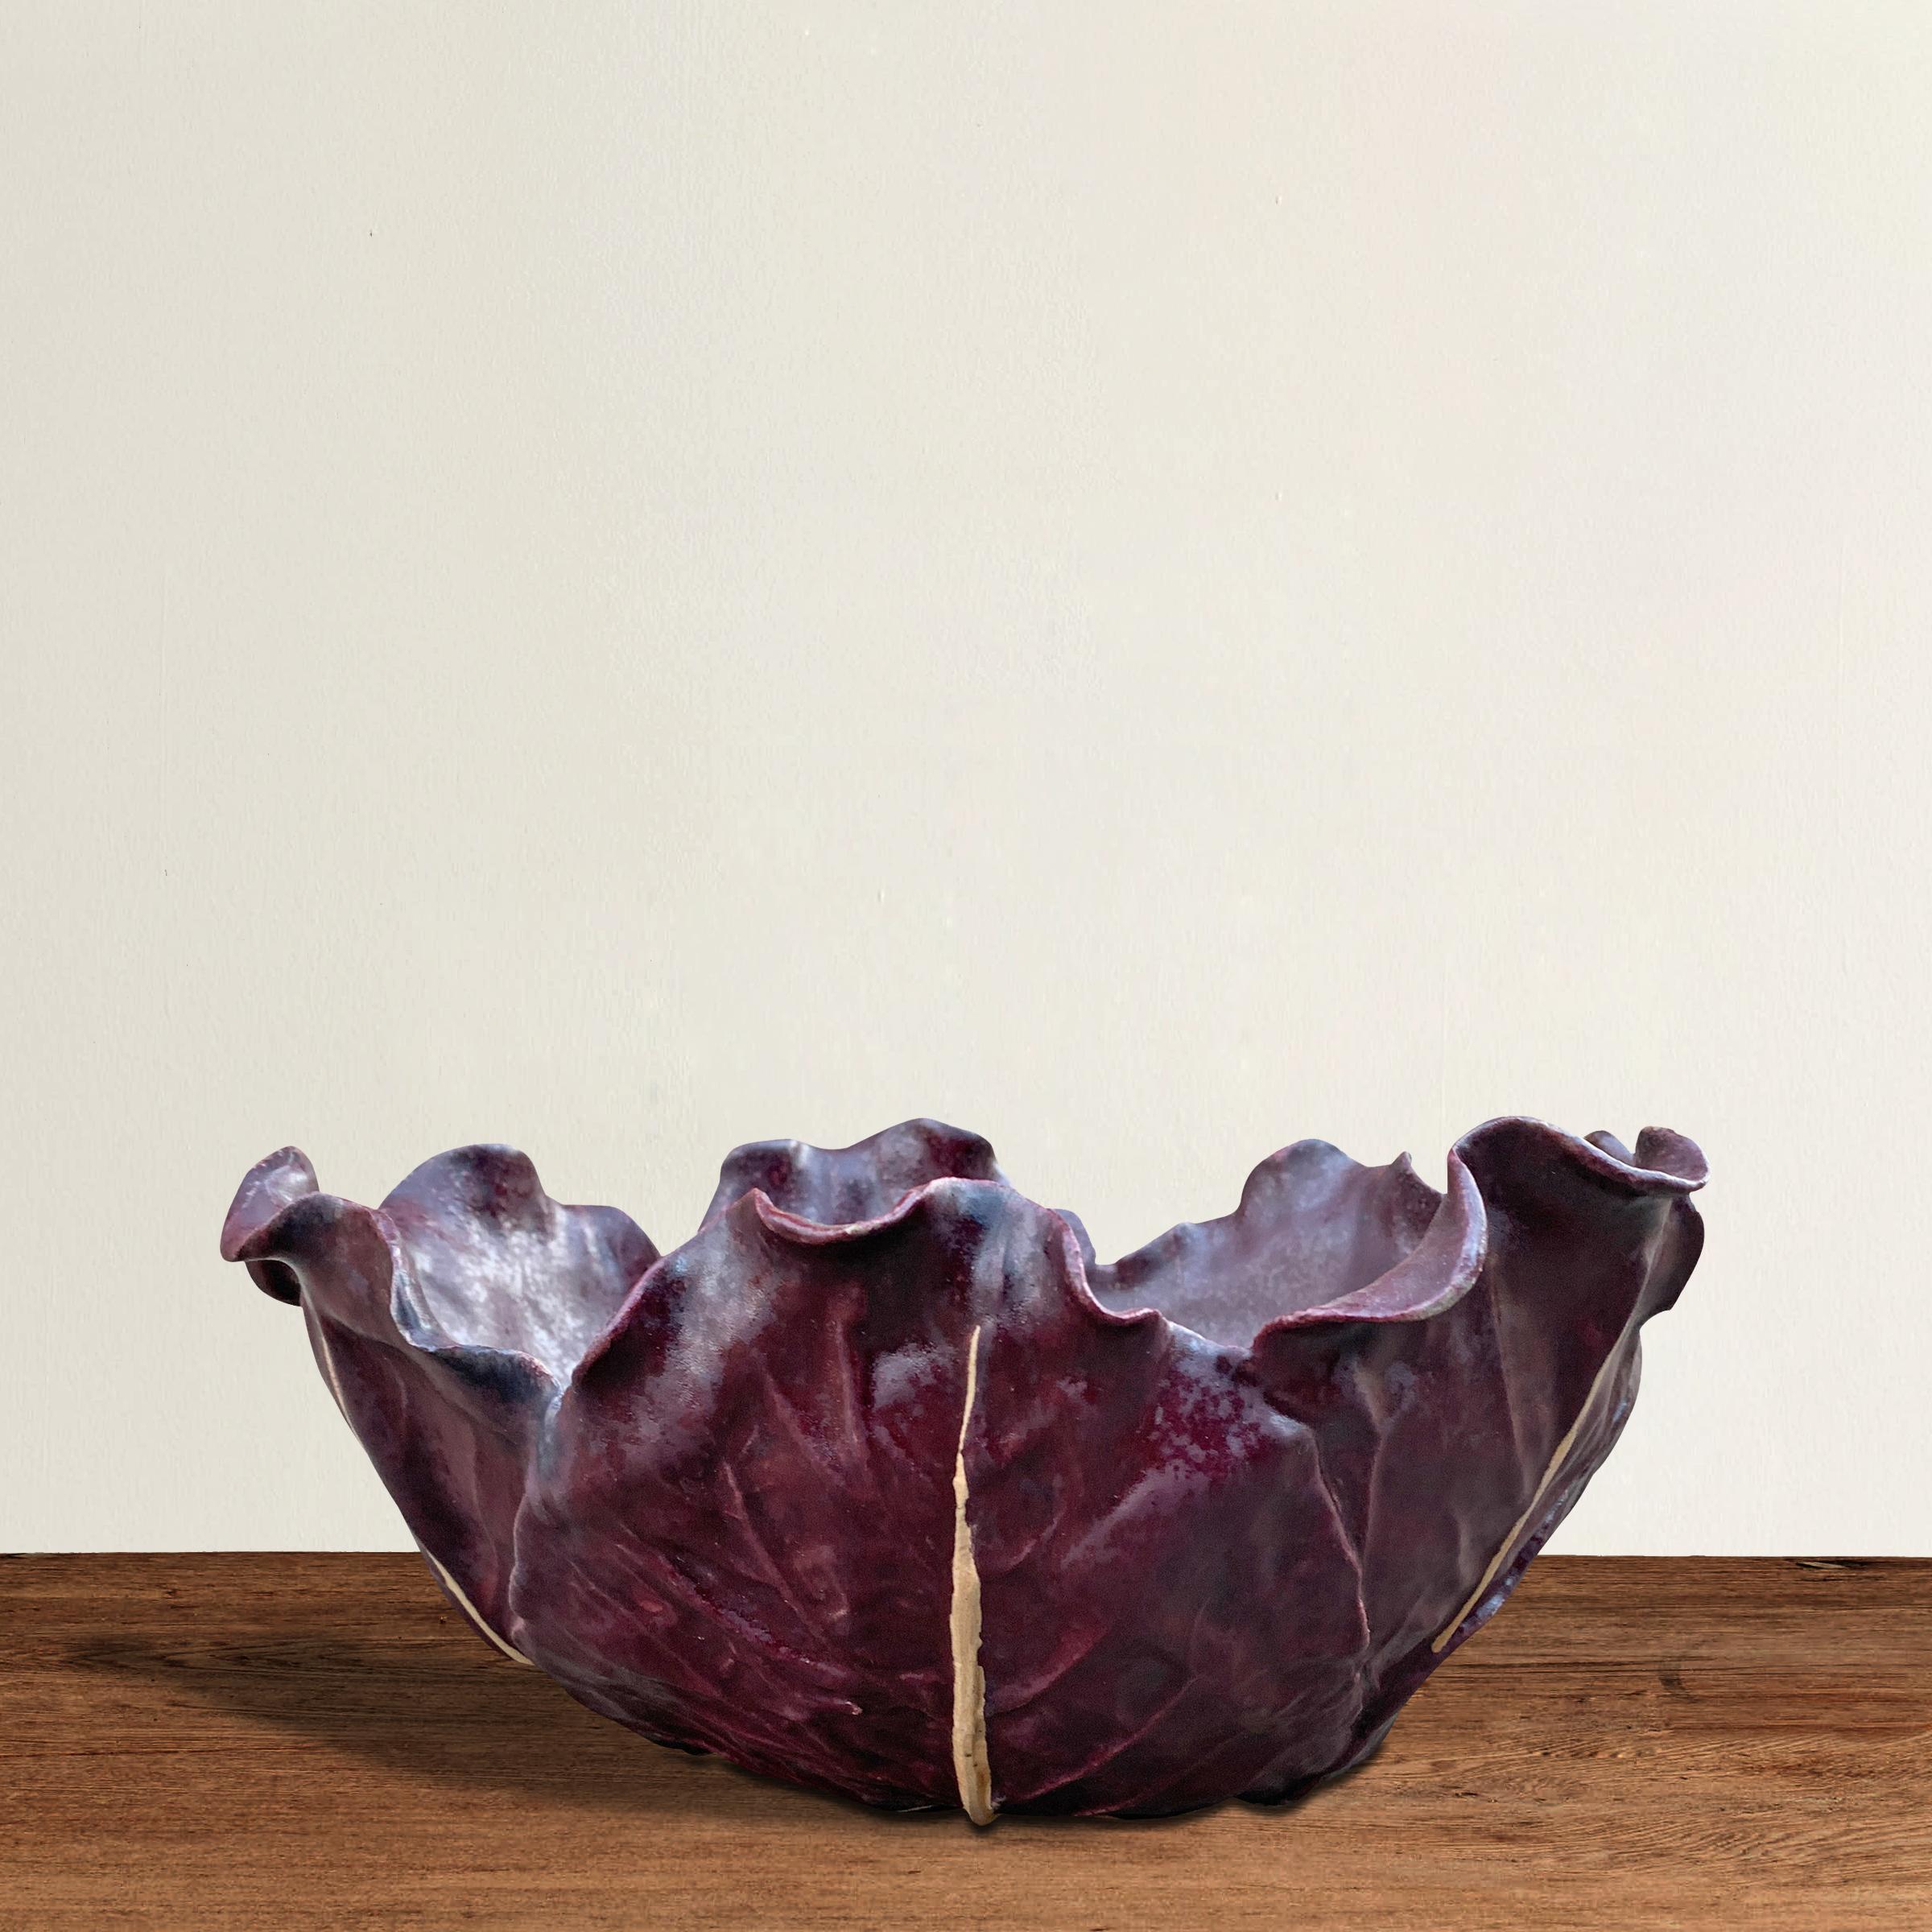 A wonderful and charming vintage hand-built ceramic red cabbage bowl with a fabulous glaze that you'd swear is the real deal. Sign illegibly on the bottom. Perfect for serving a small salad at your next garden party, but also holds its own sitting